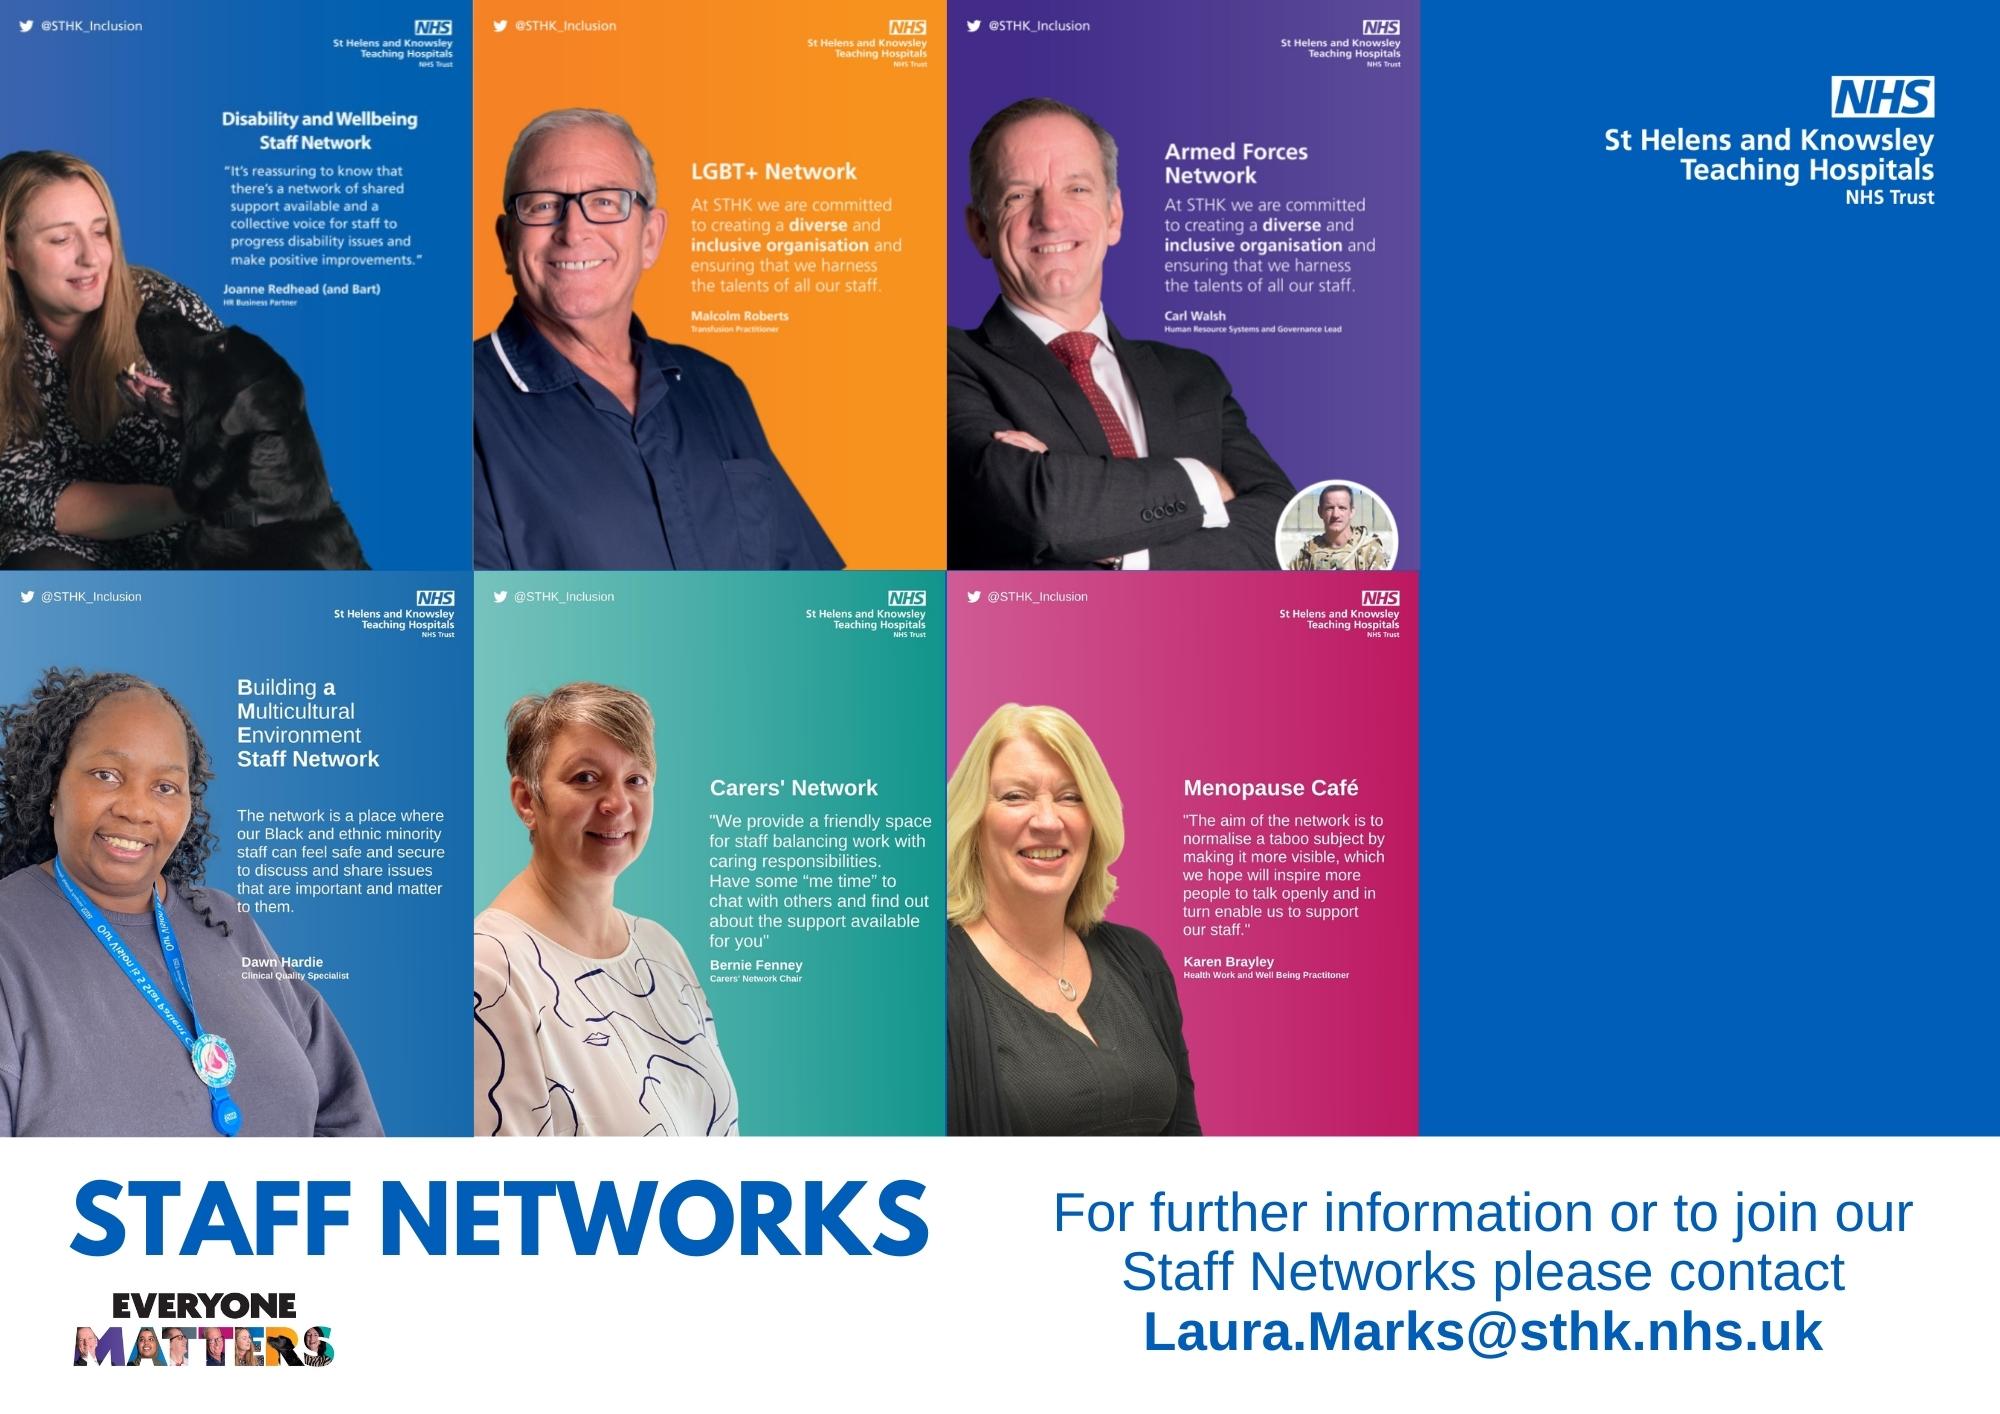 Image showing our six staff networks